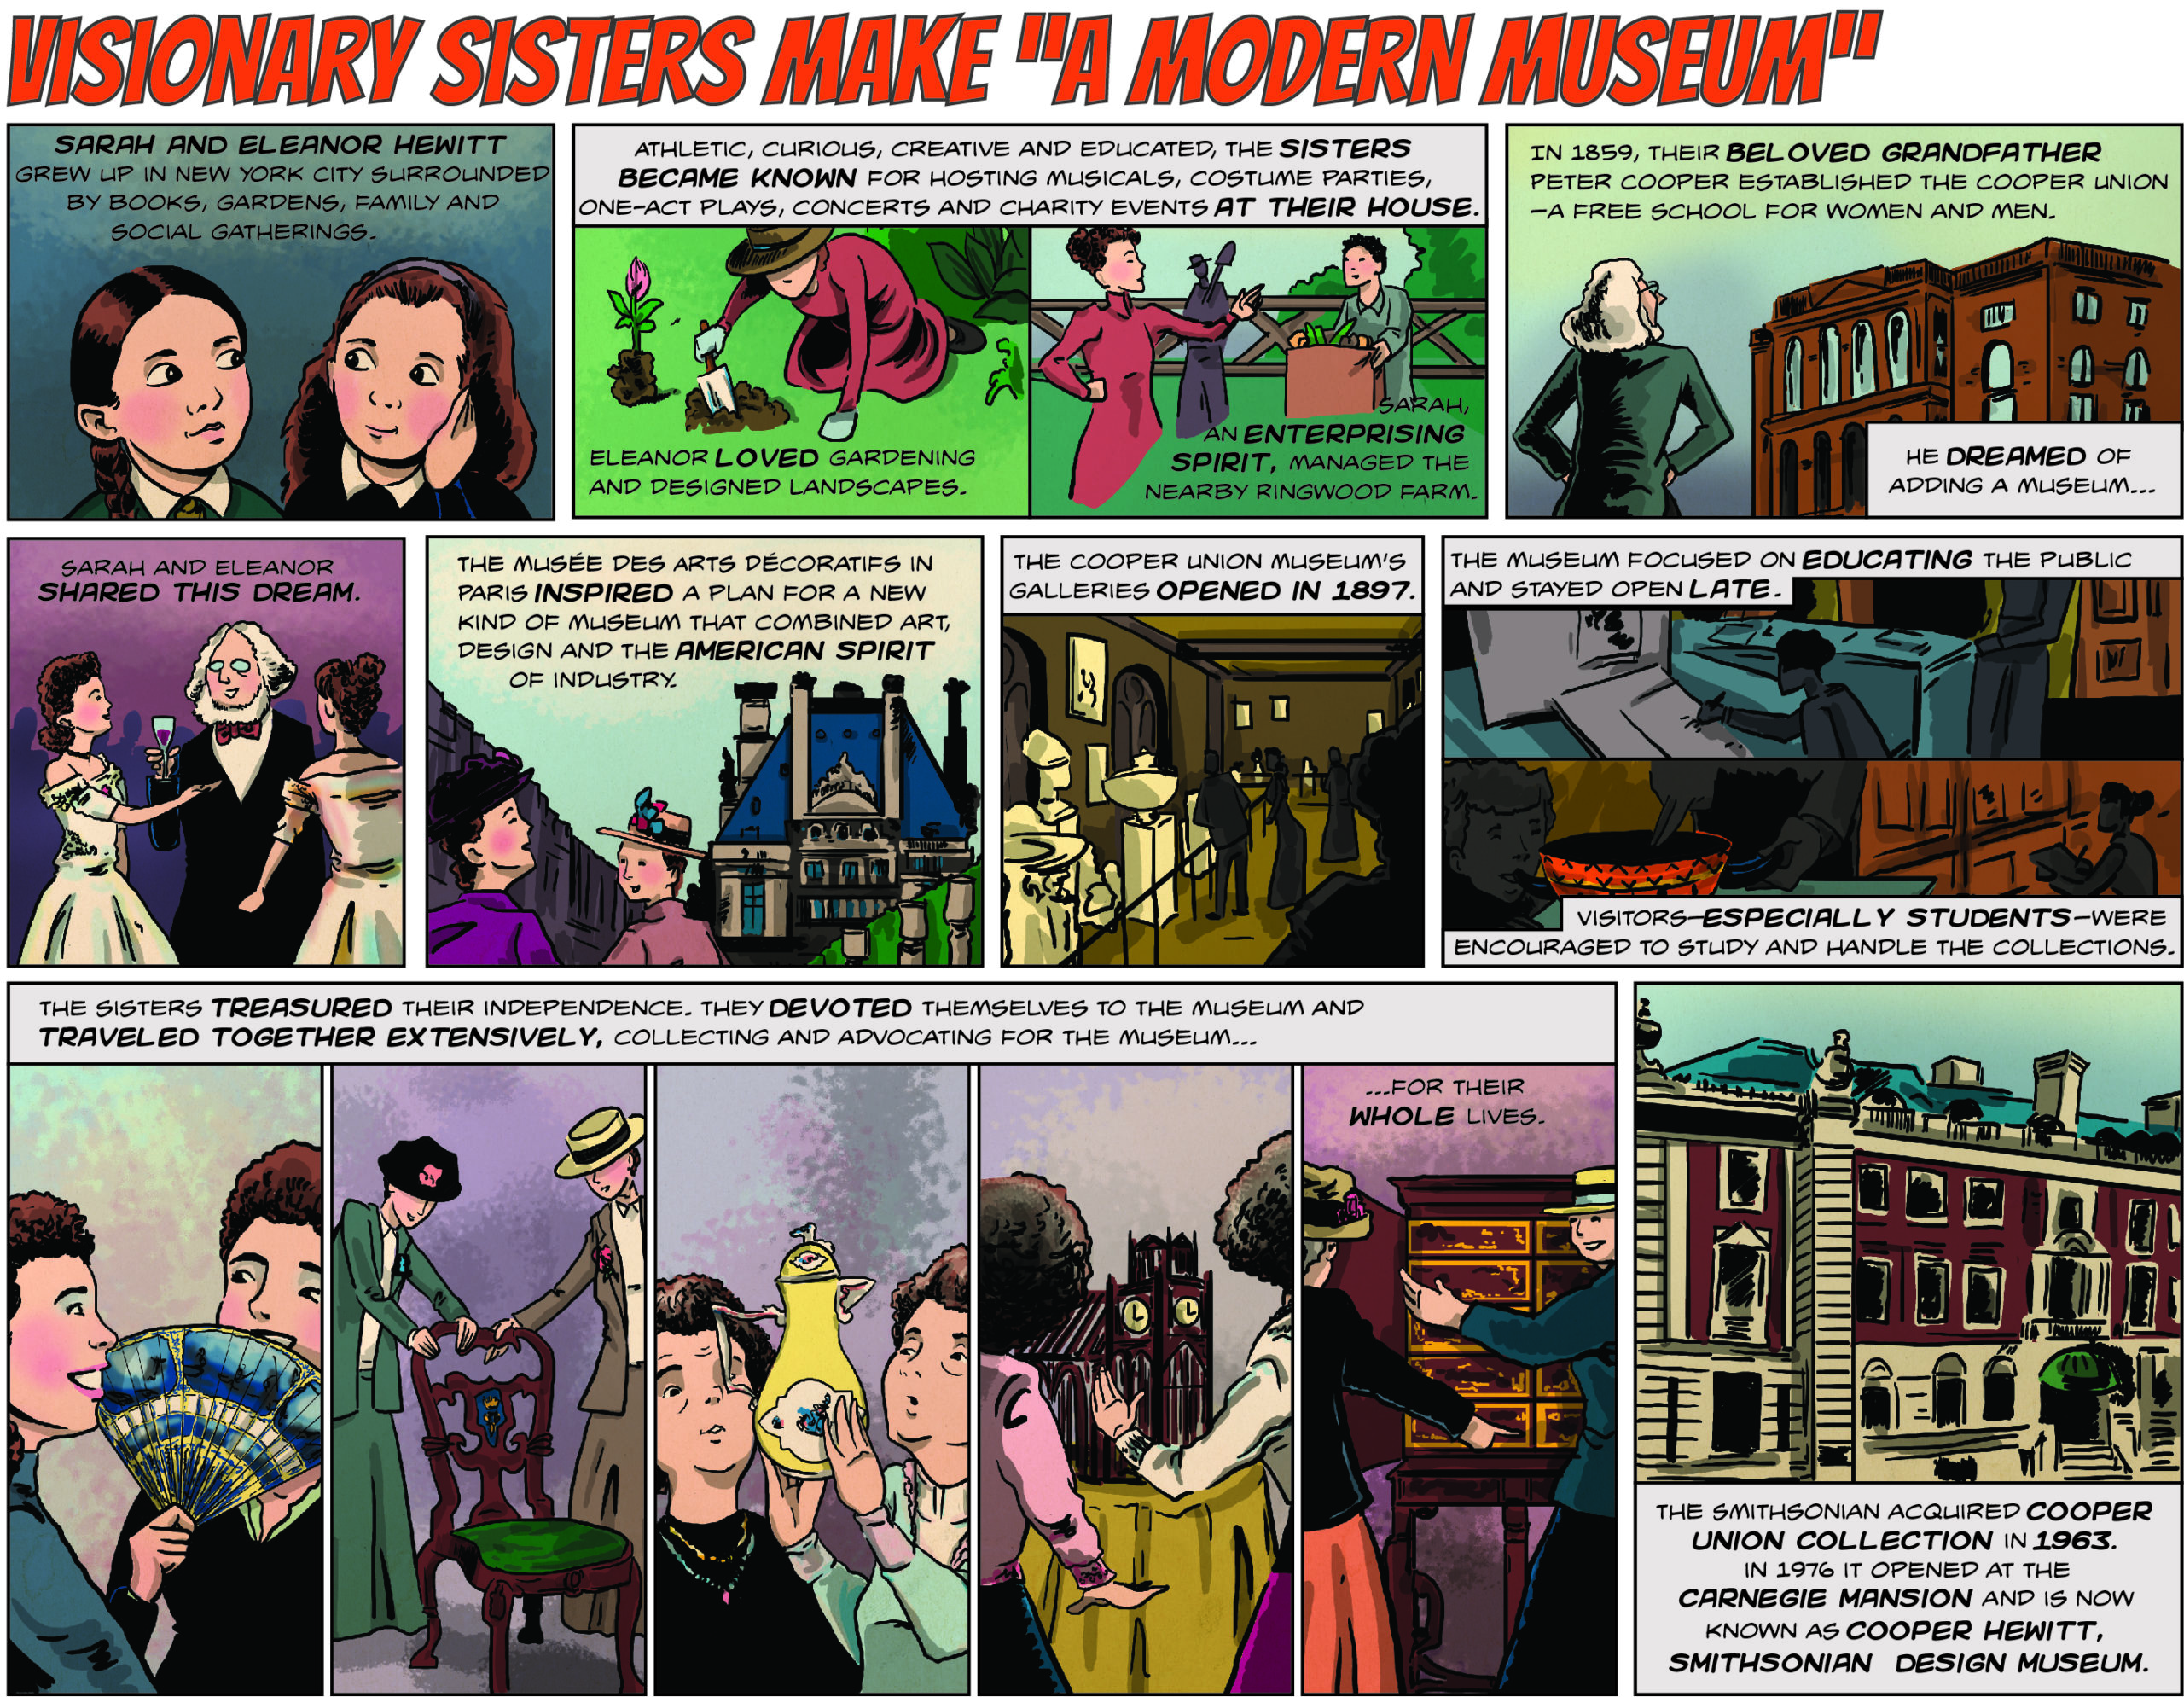 Illustration in a comic book style of the narrative of the origin of the Cooper Hewitt museum.